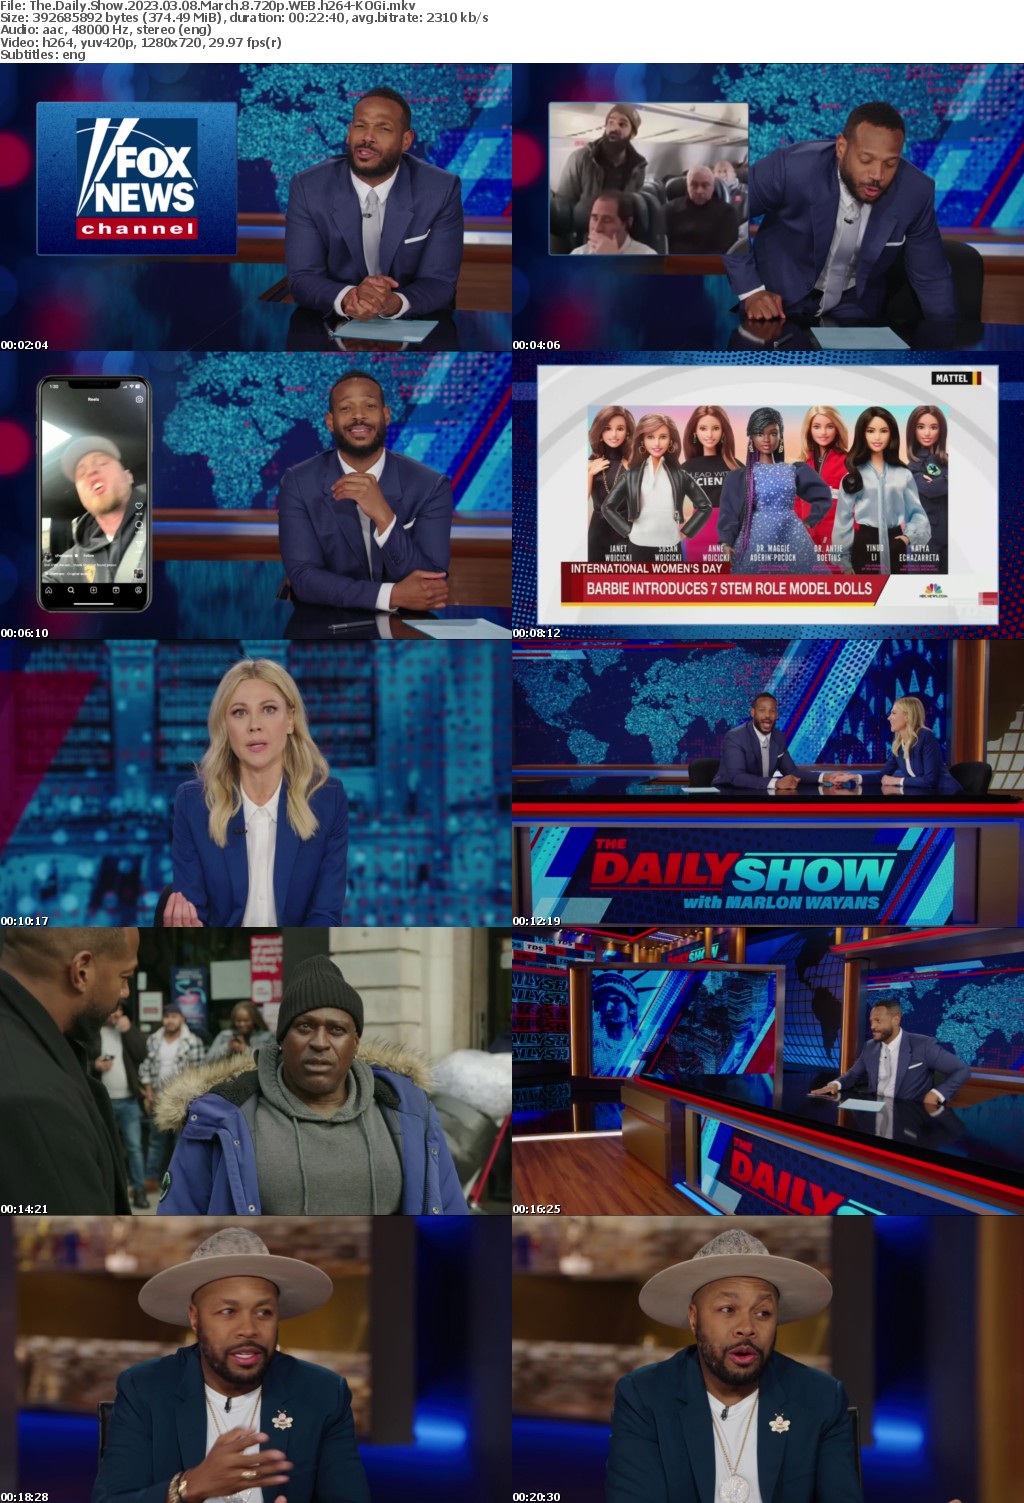 The Daily Show 2023 03 08 March 8 720p WEB h264-KOGi